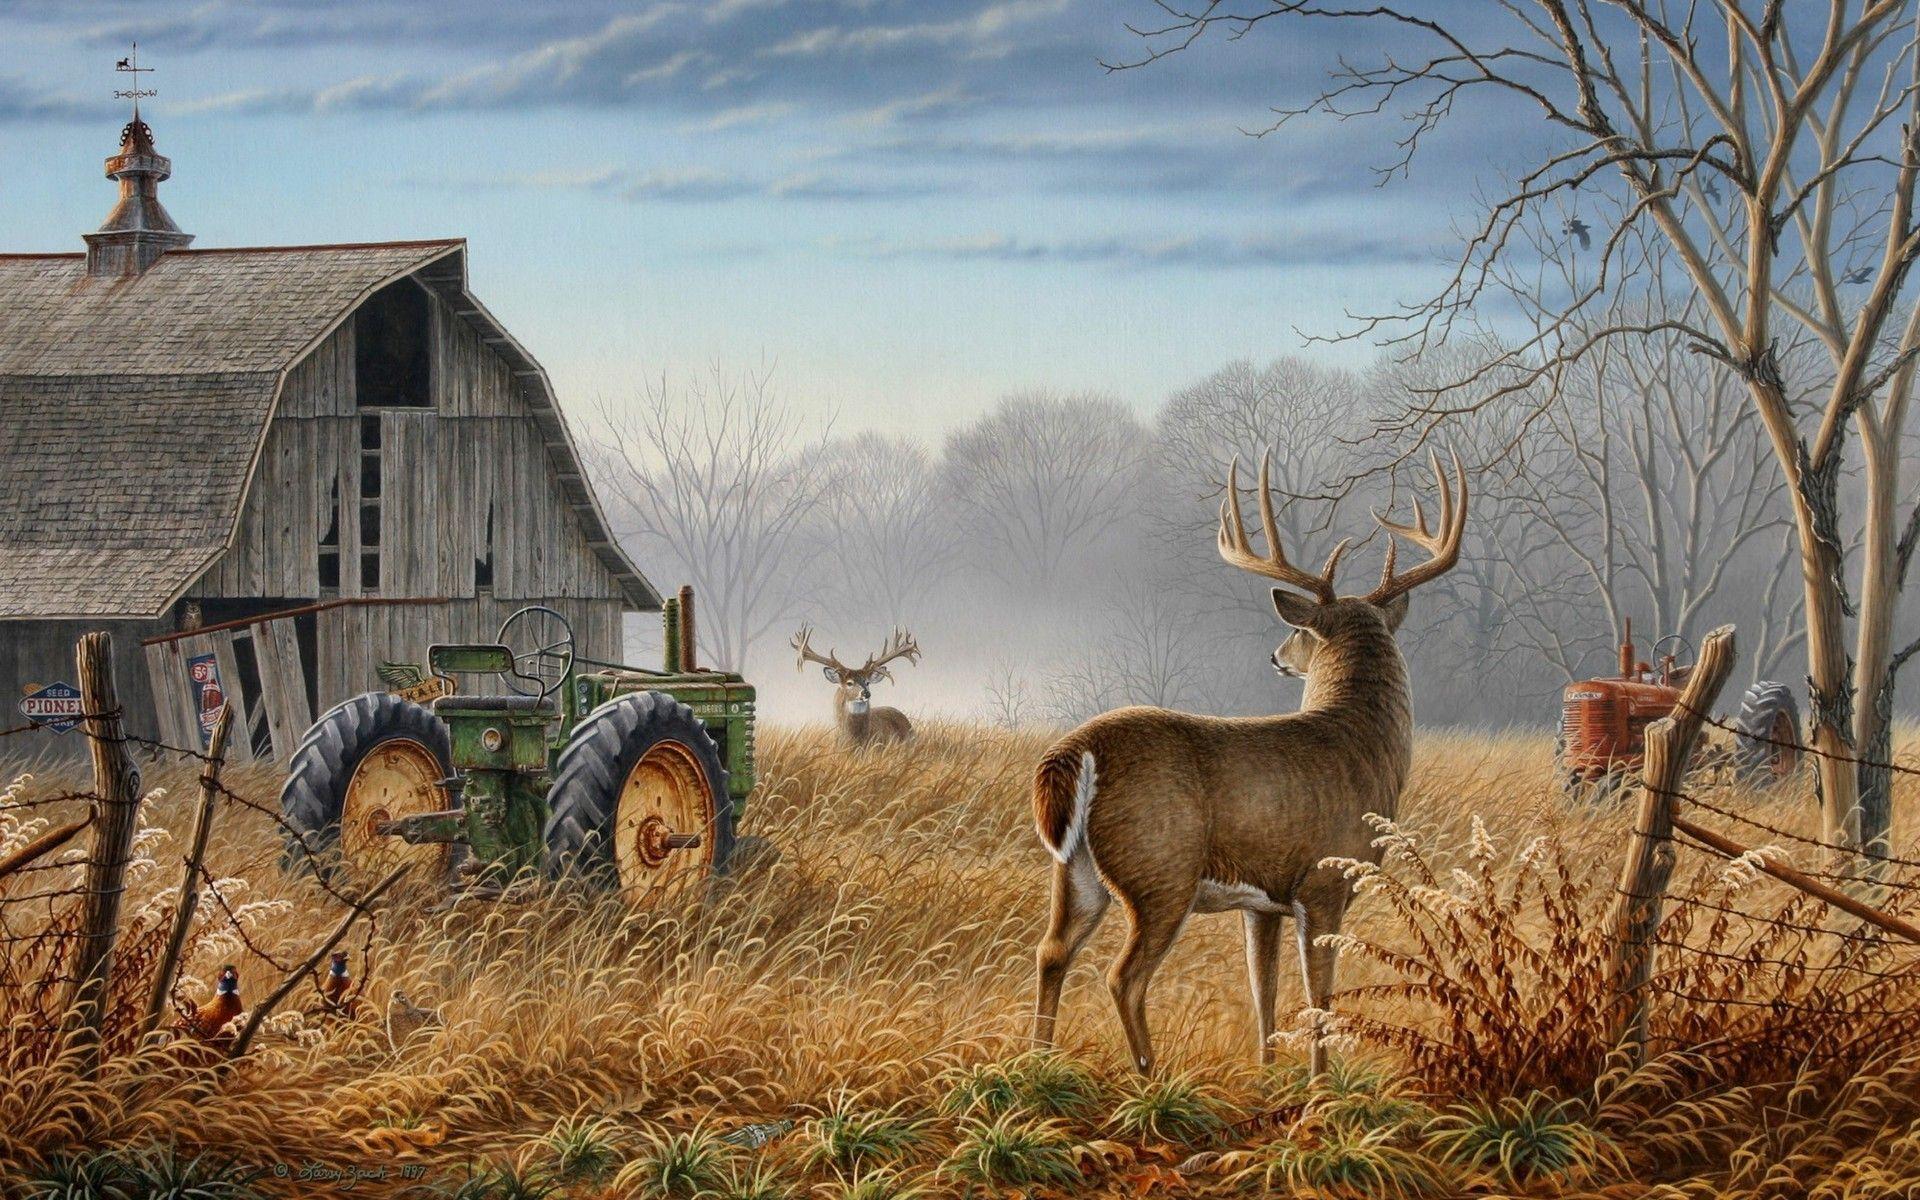 Whitetail Deer Background